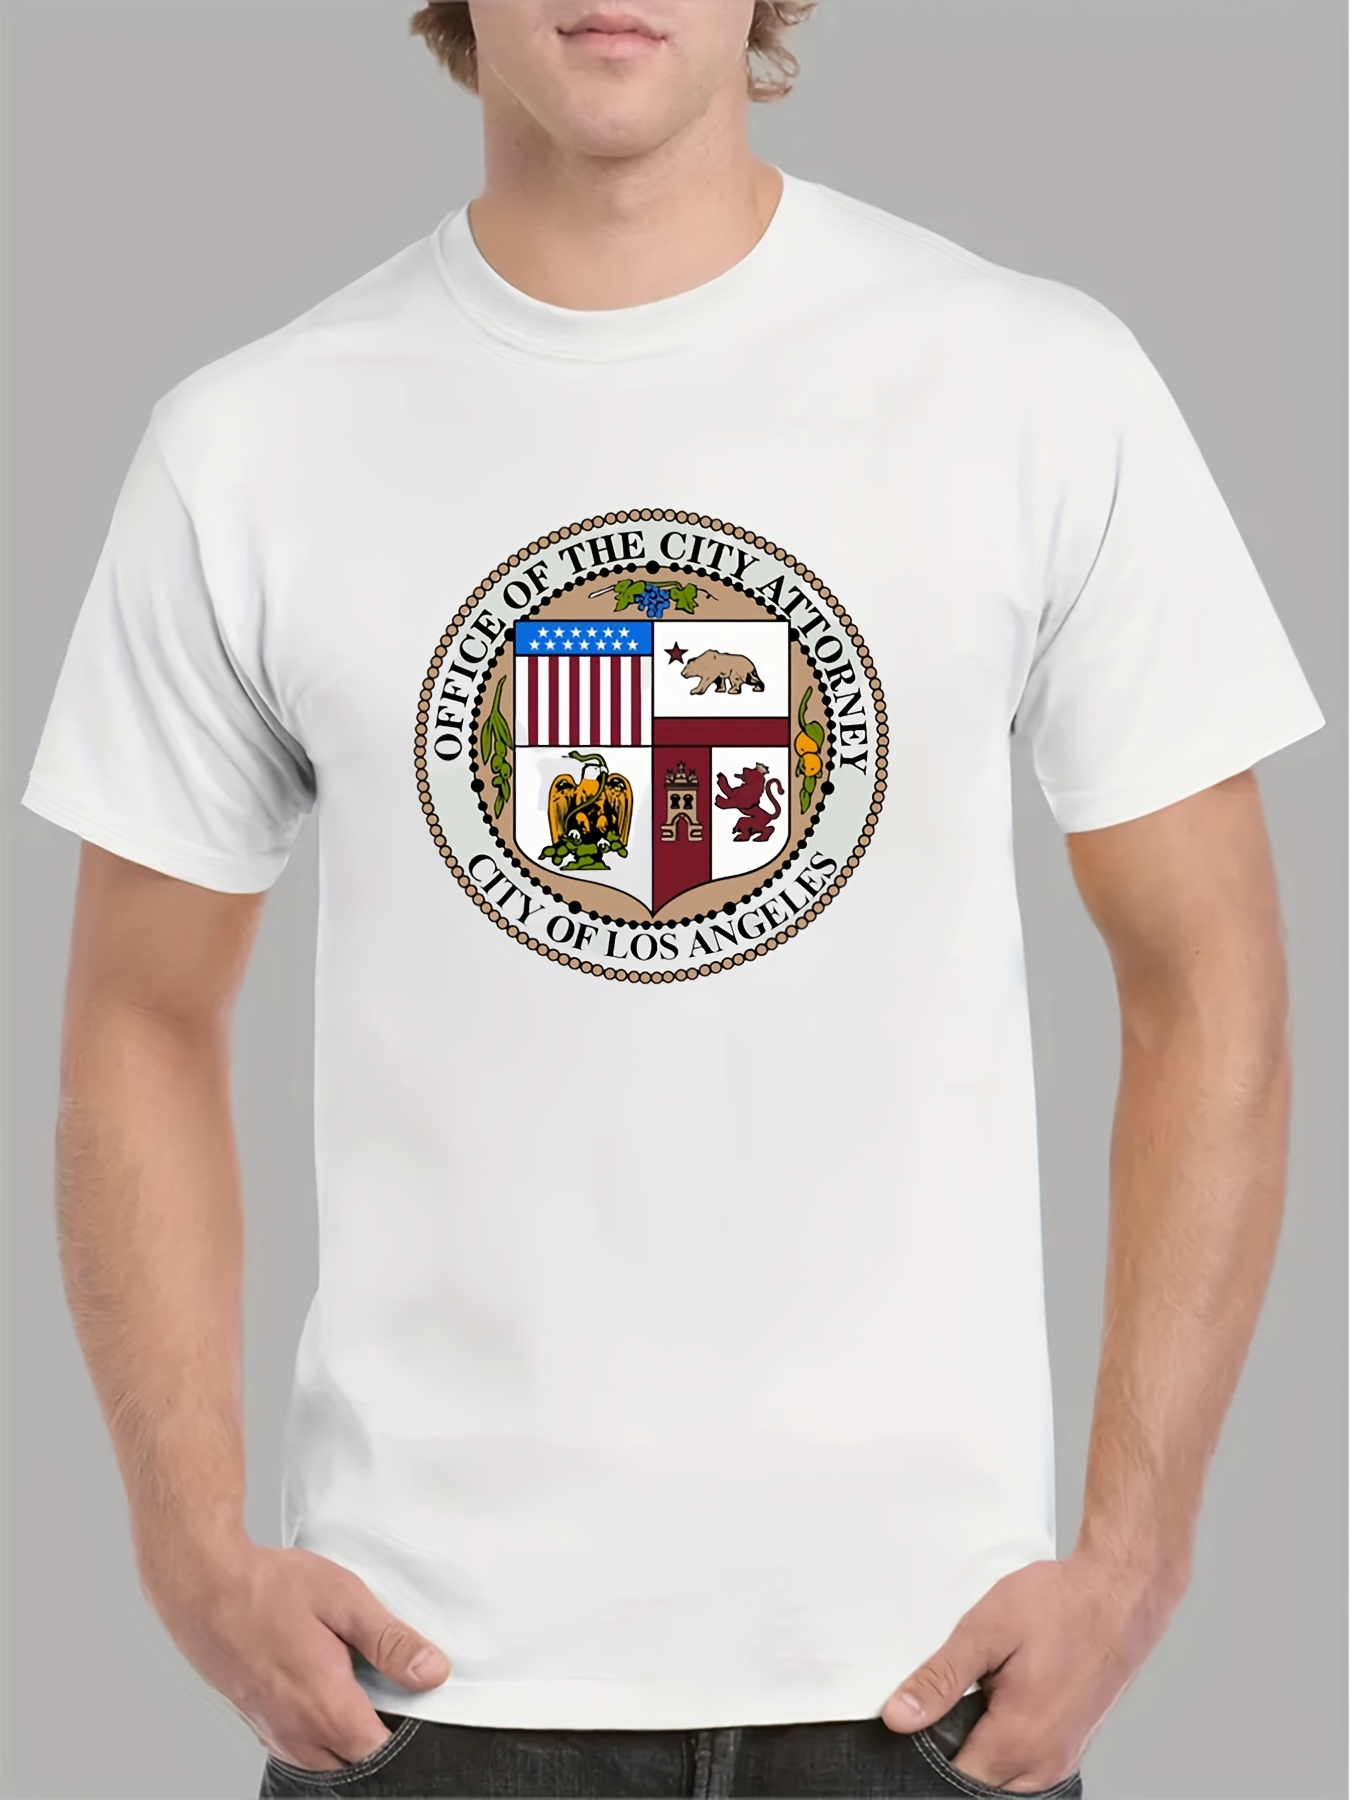 Los Angeles City Department T-Shirts